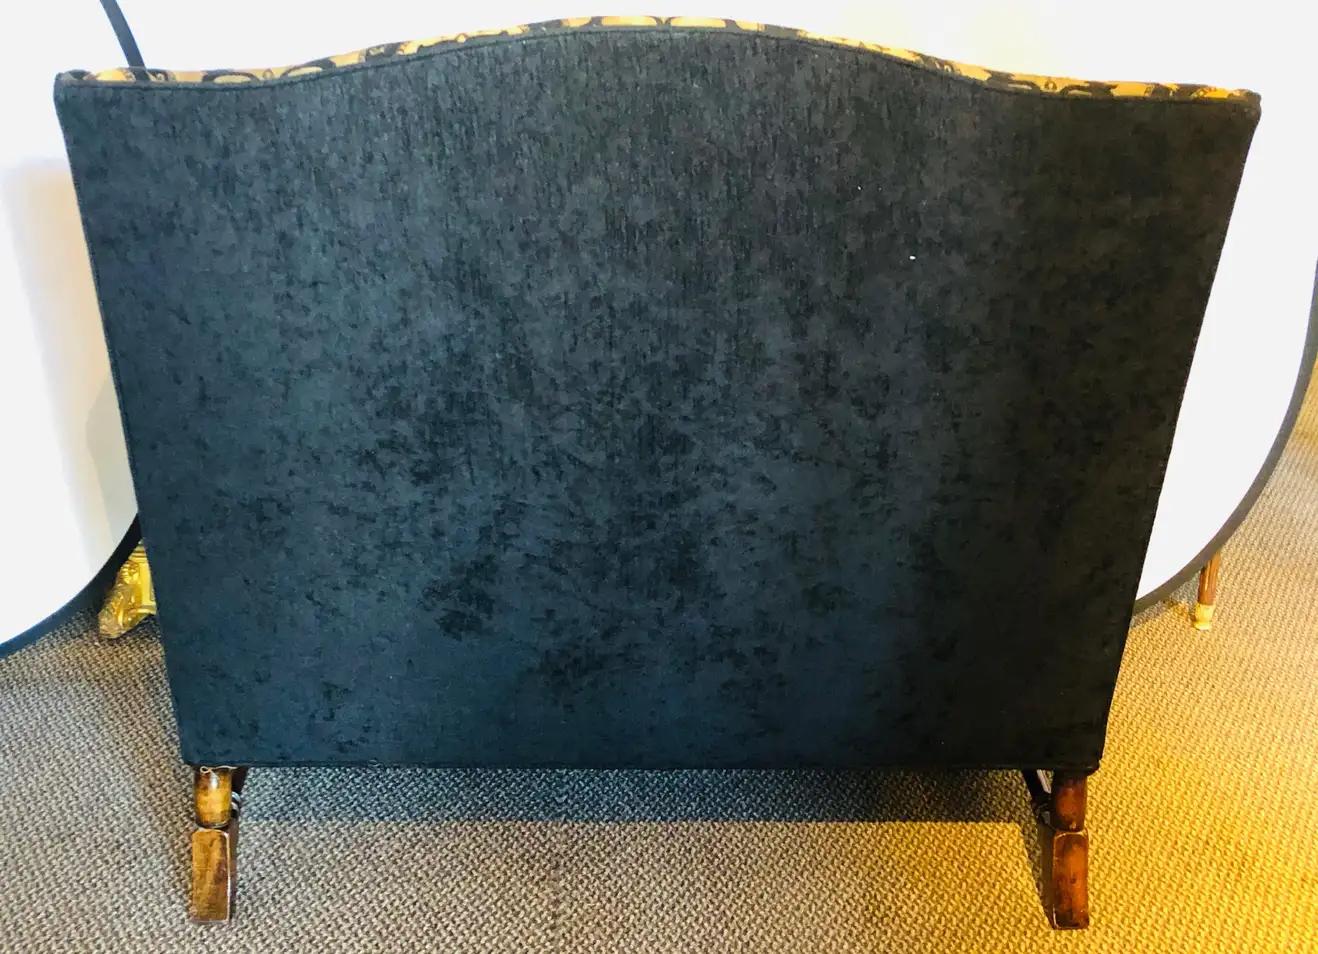 Italian Rococo Revival Style Settee or Sofa with Heraldic Motif in Black & Beige For Sale 6